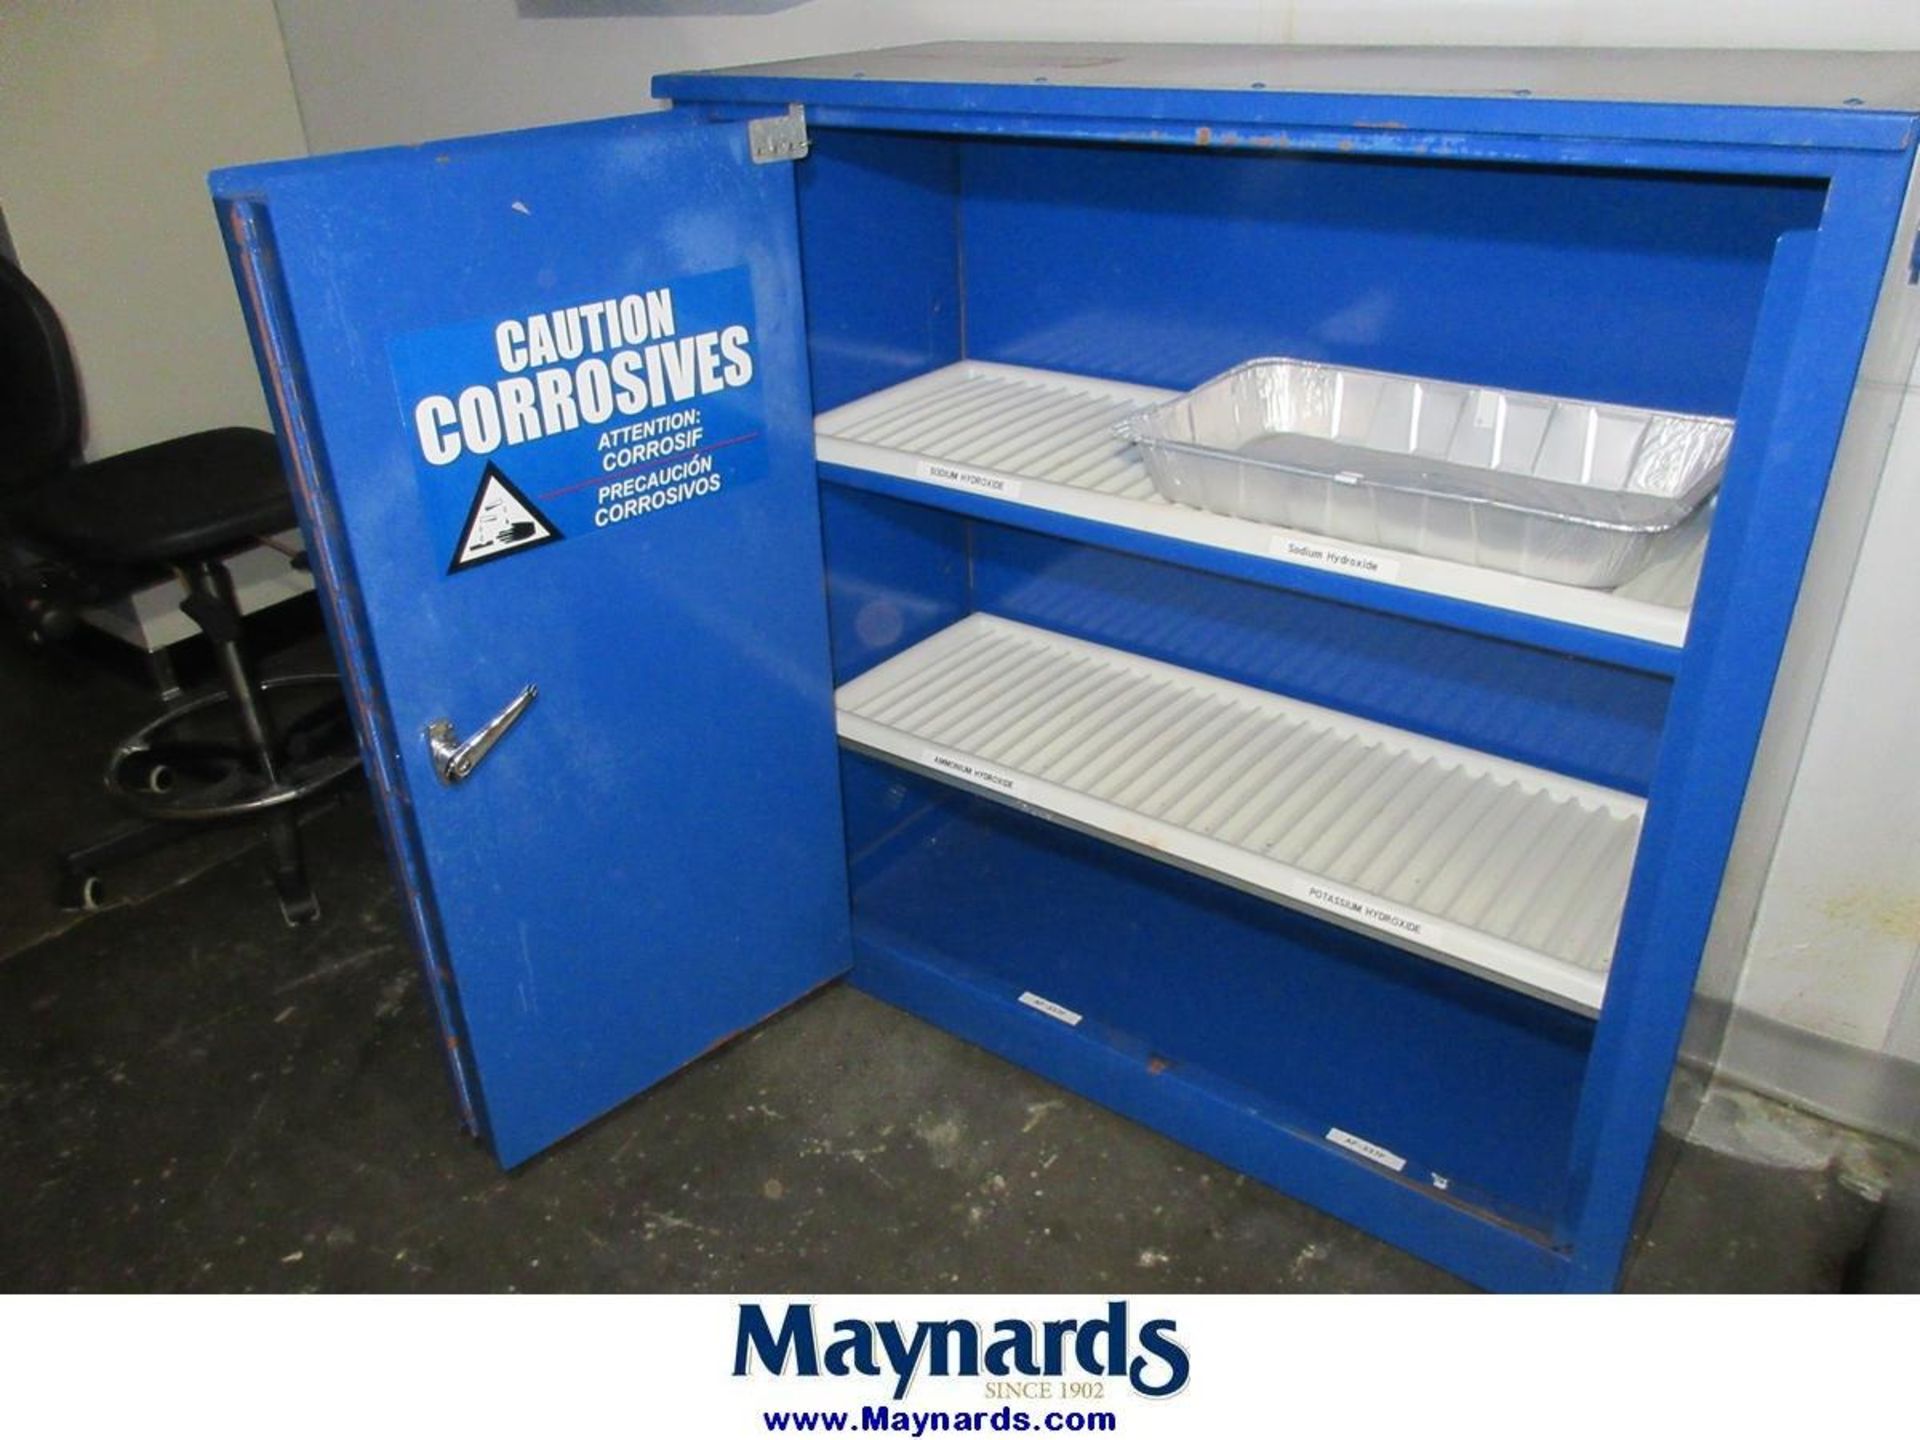 Eagle Manufacturing Co. CRA-30 Acid and Corrosives Storage Cabinet - Image 2 of 3